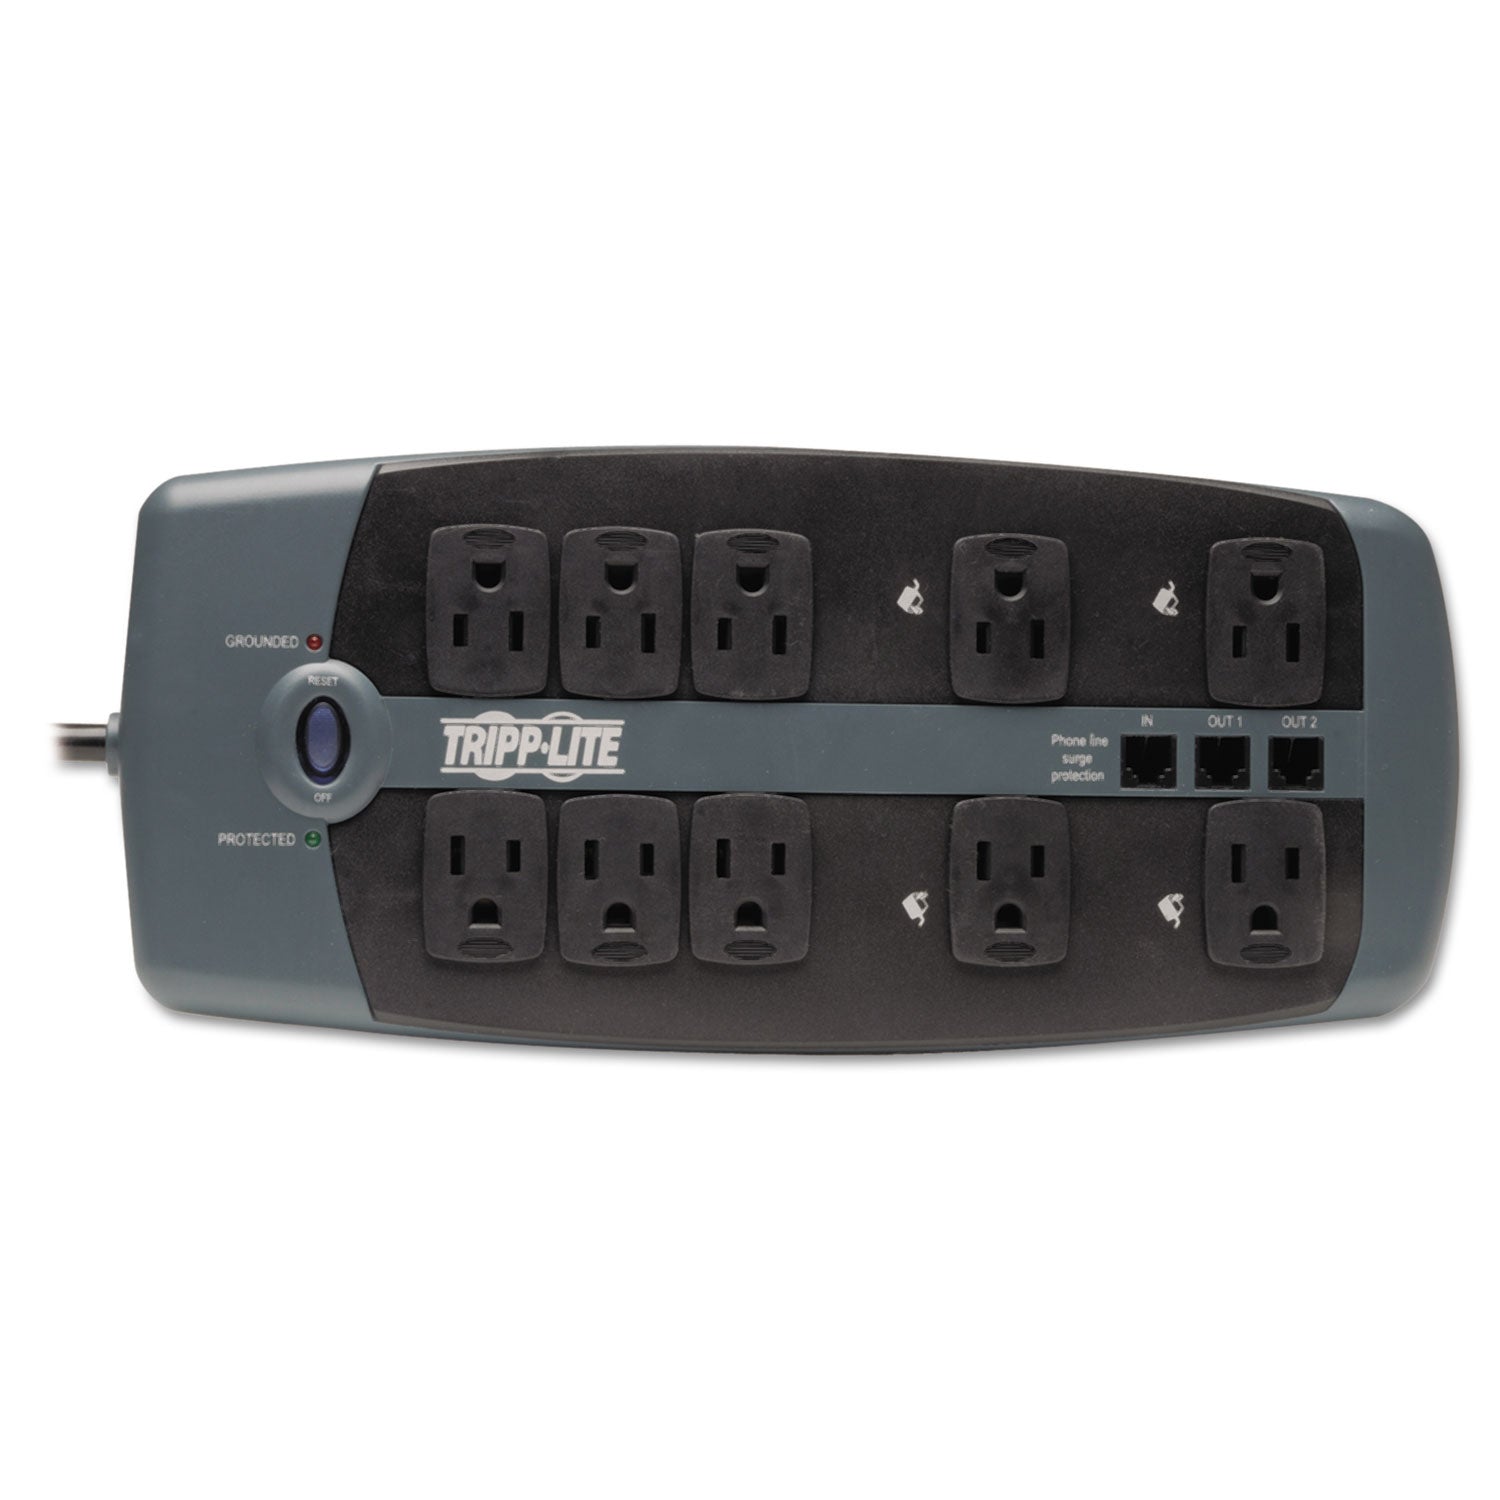 Protect It! Surge Protector, 10 AC Outlets, 8 ft Cord, 2,395 J, Black - 